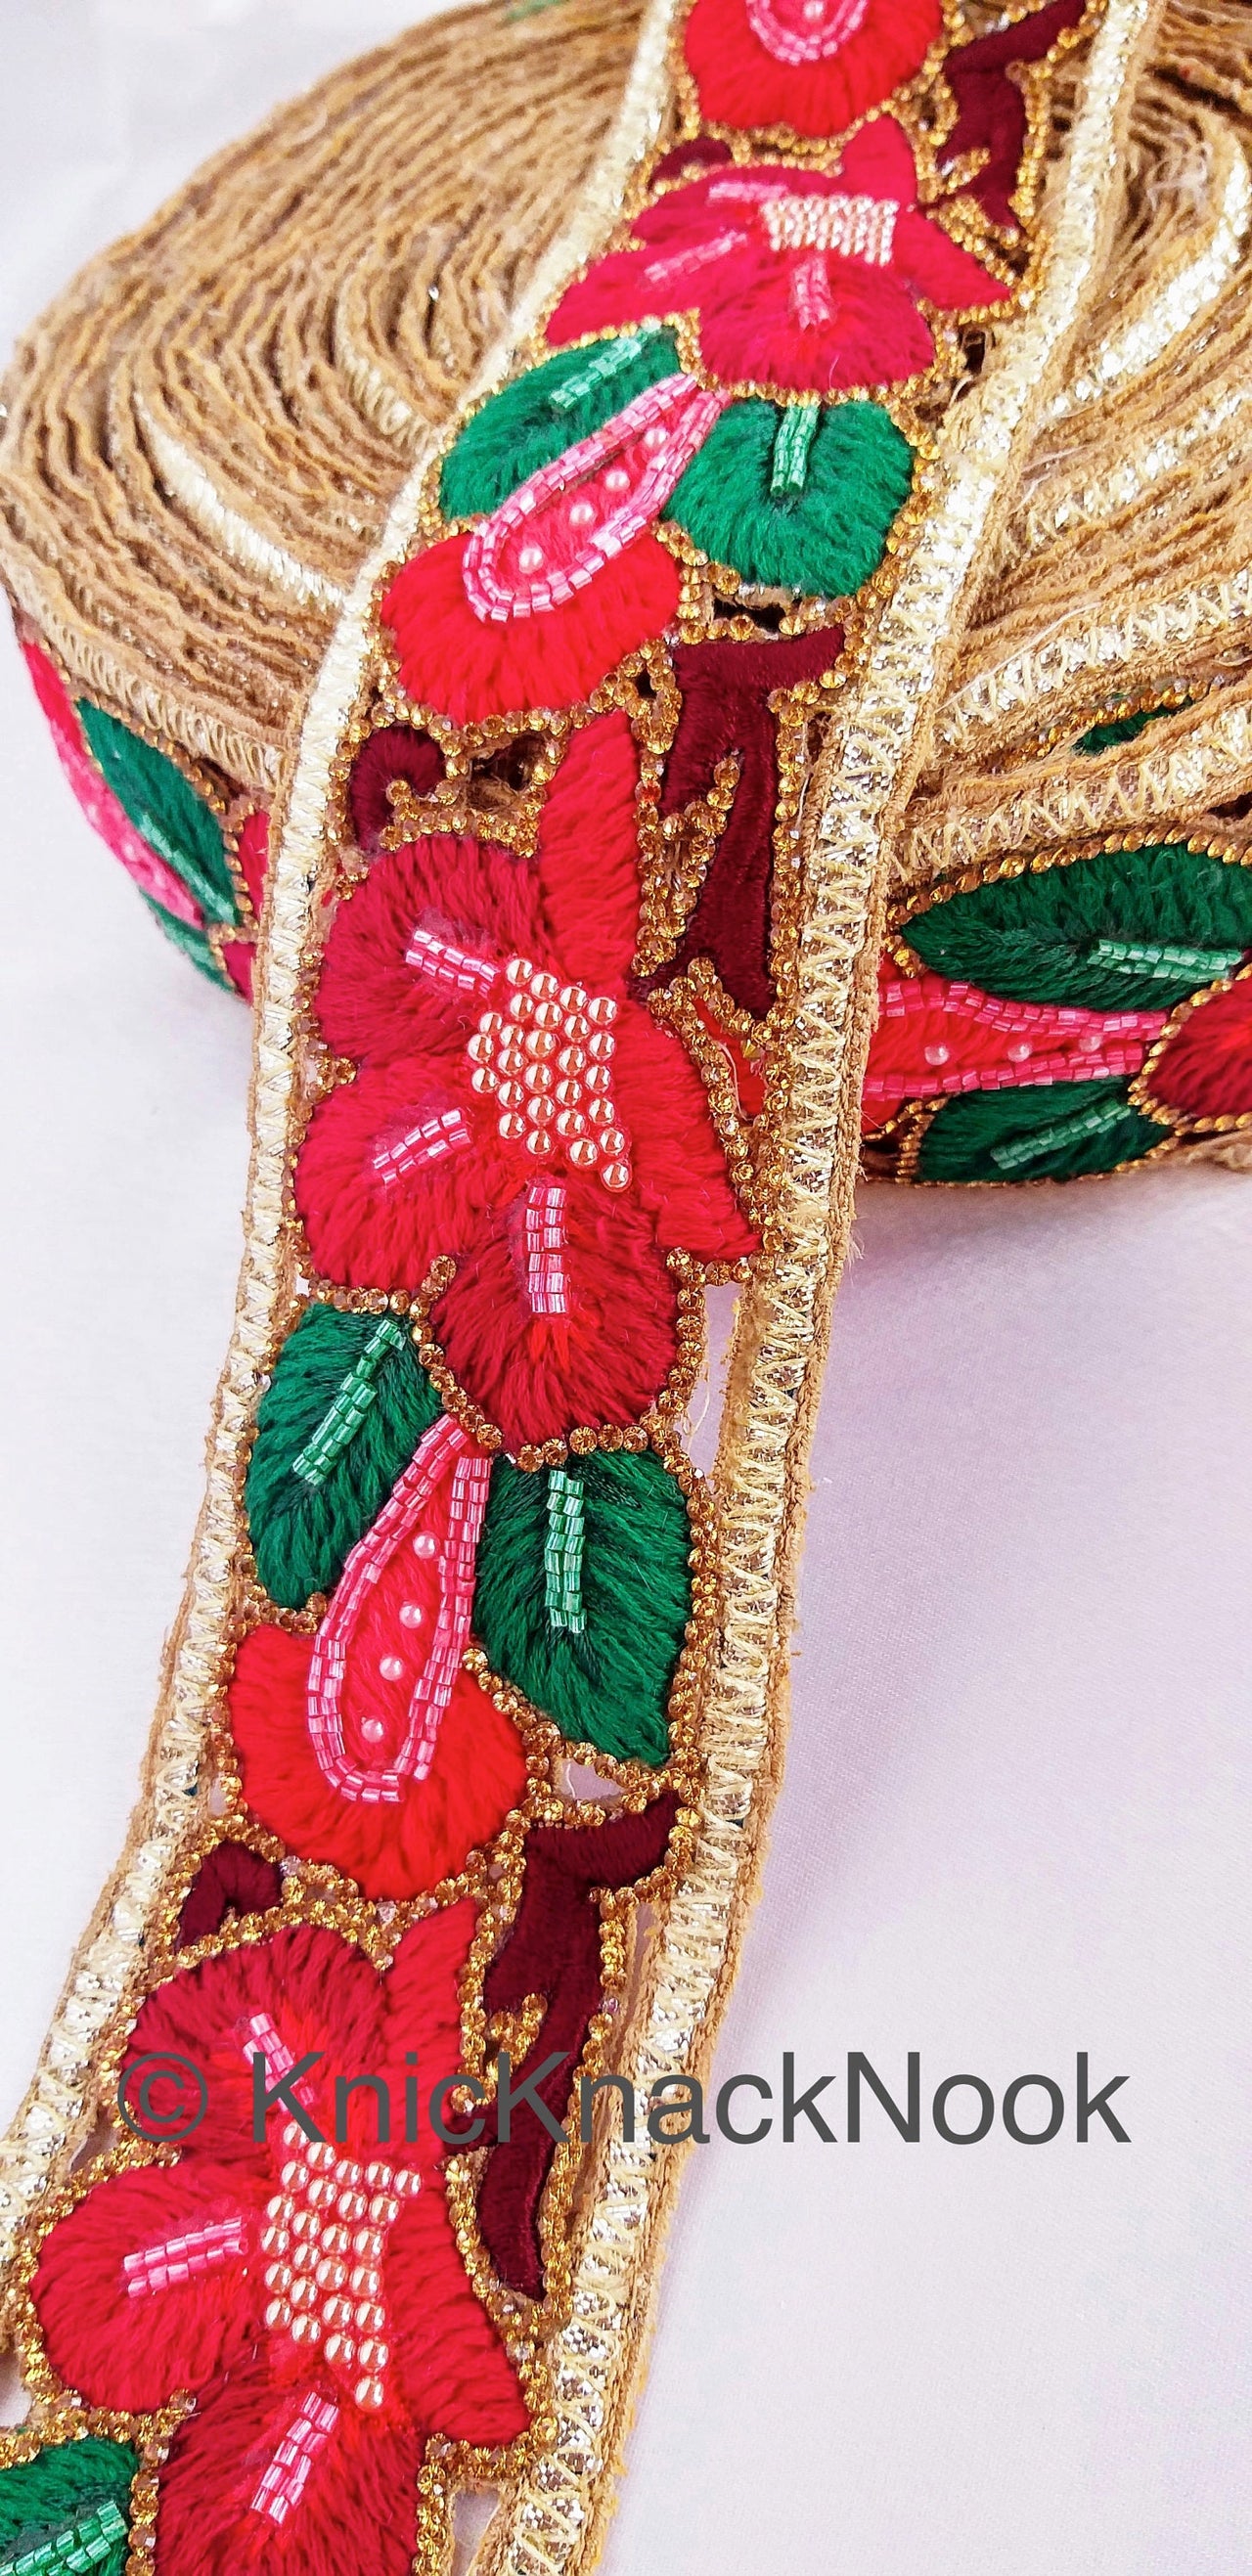 Wholesale Red, Green and Gold Hand Embroidered Cutwork Floral Trim In Seed Beads, Bugle Beads & Crystal Wedding Sari Bridal Decorative